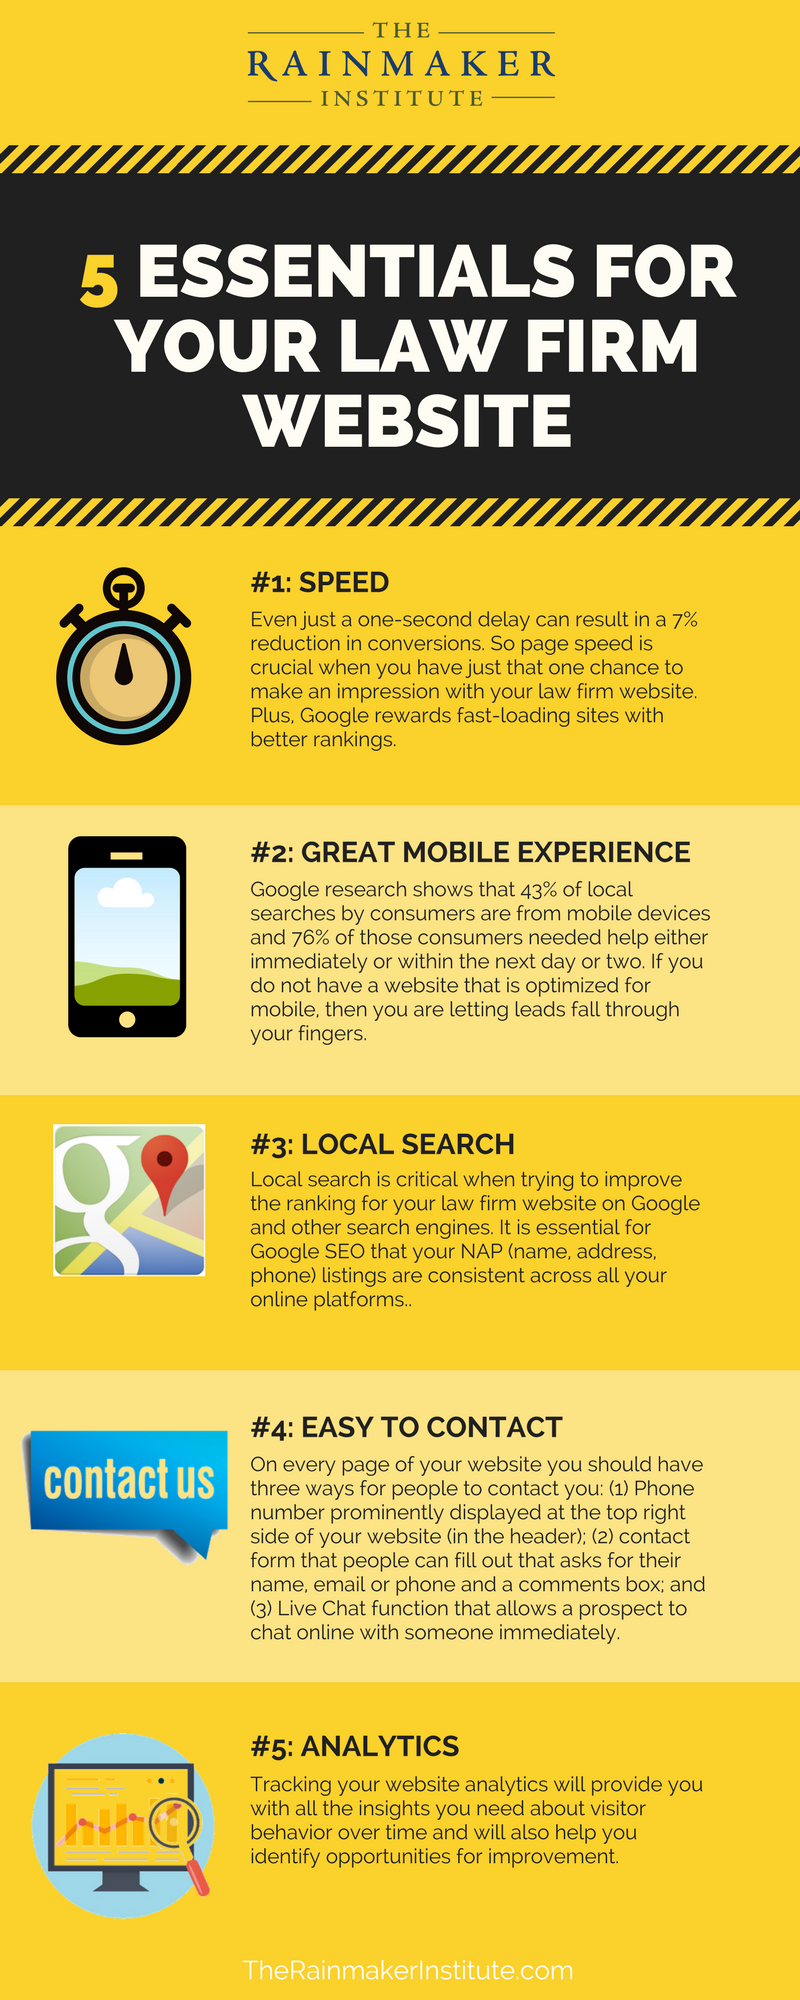 The 5 Keys to a Great Law Firm Website [INFOGRAPHIC]